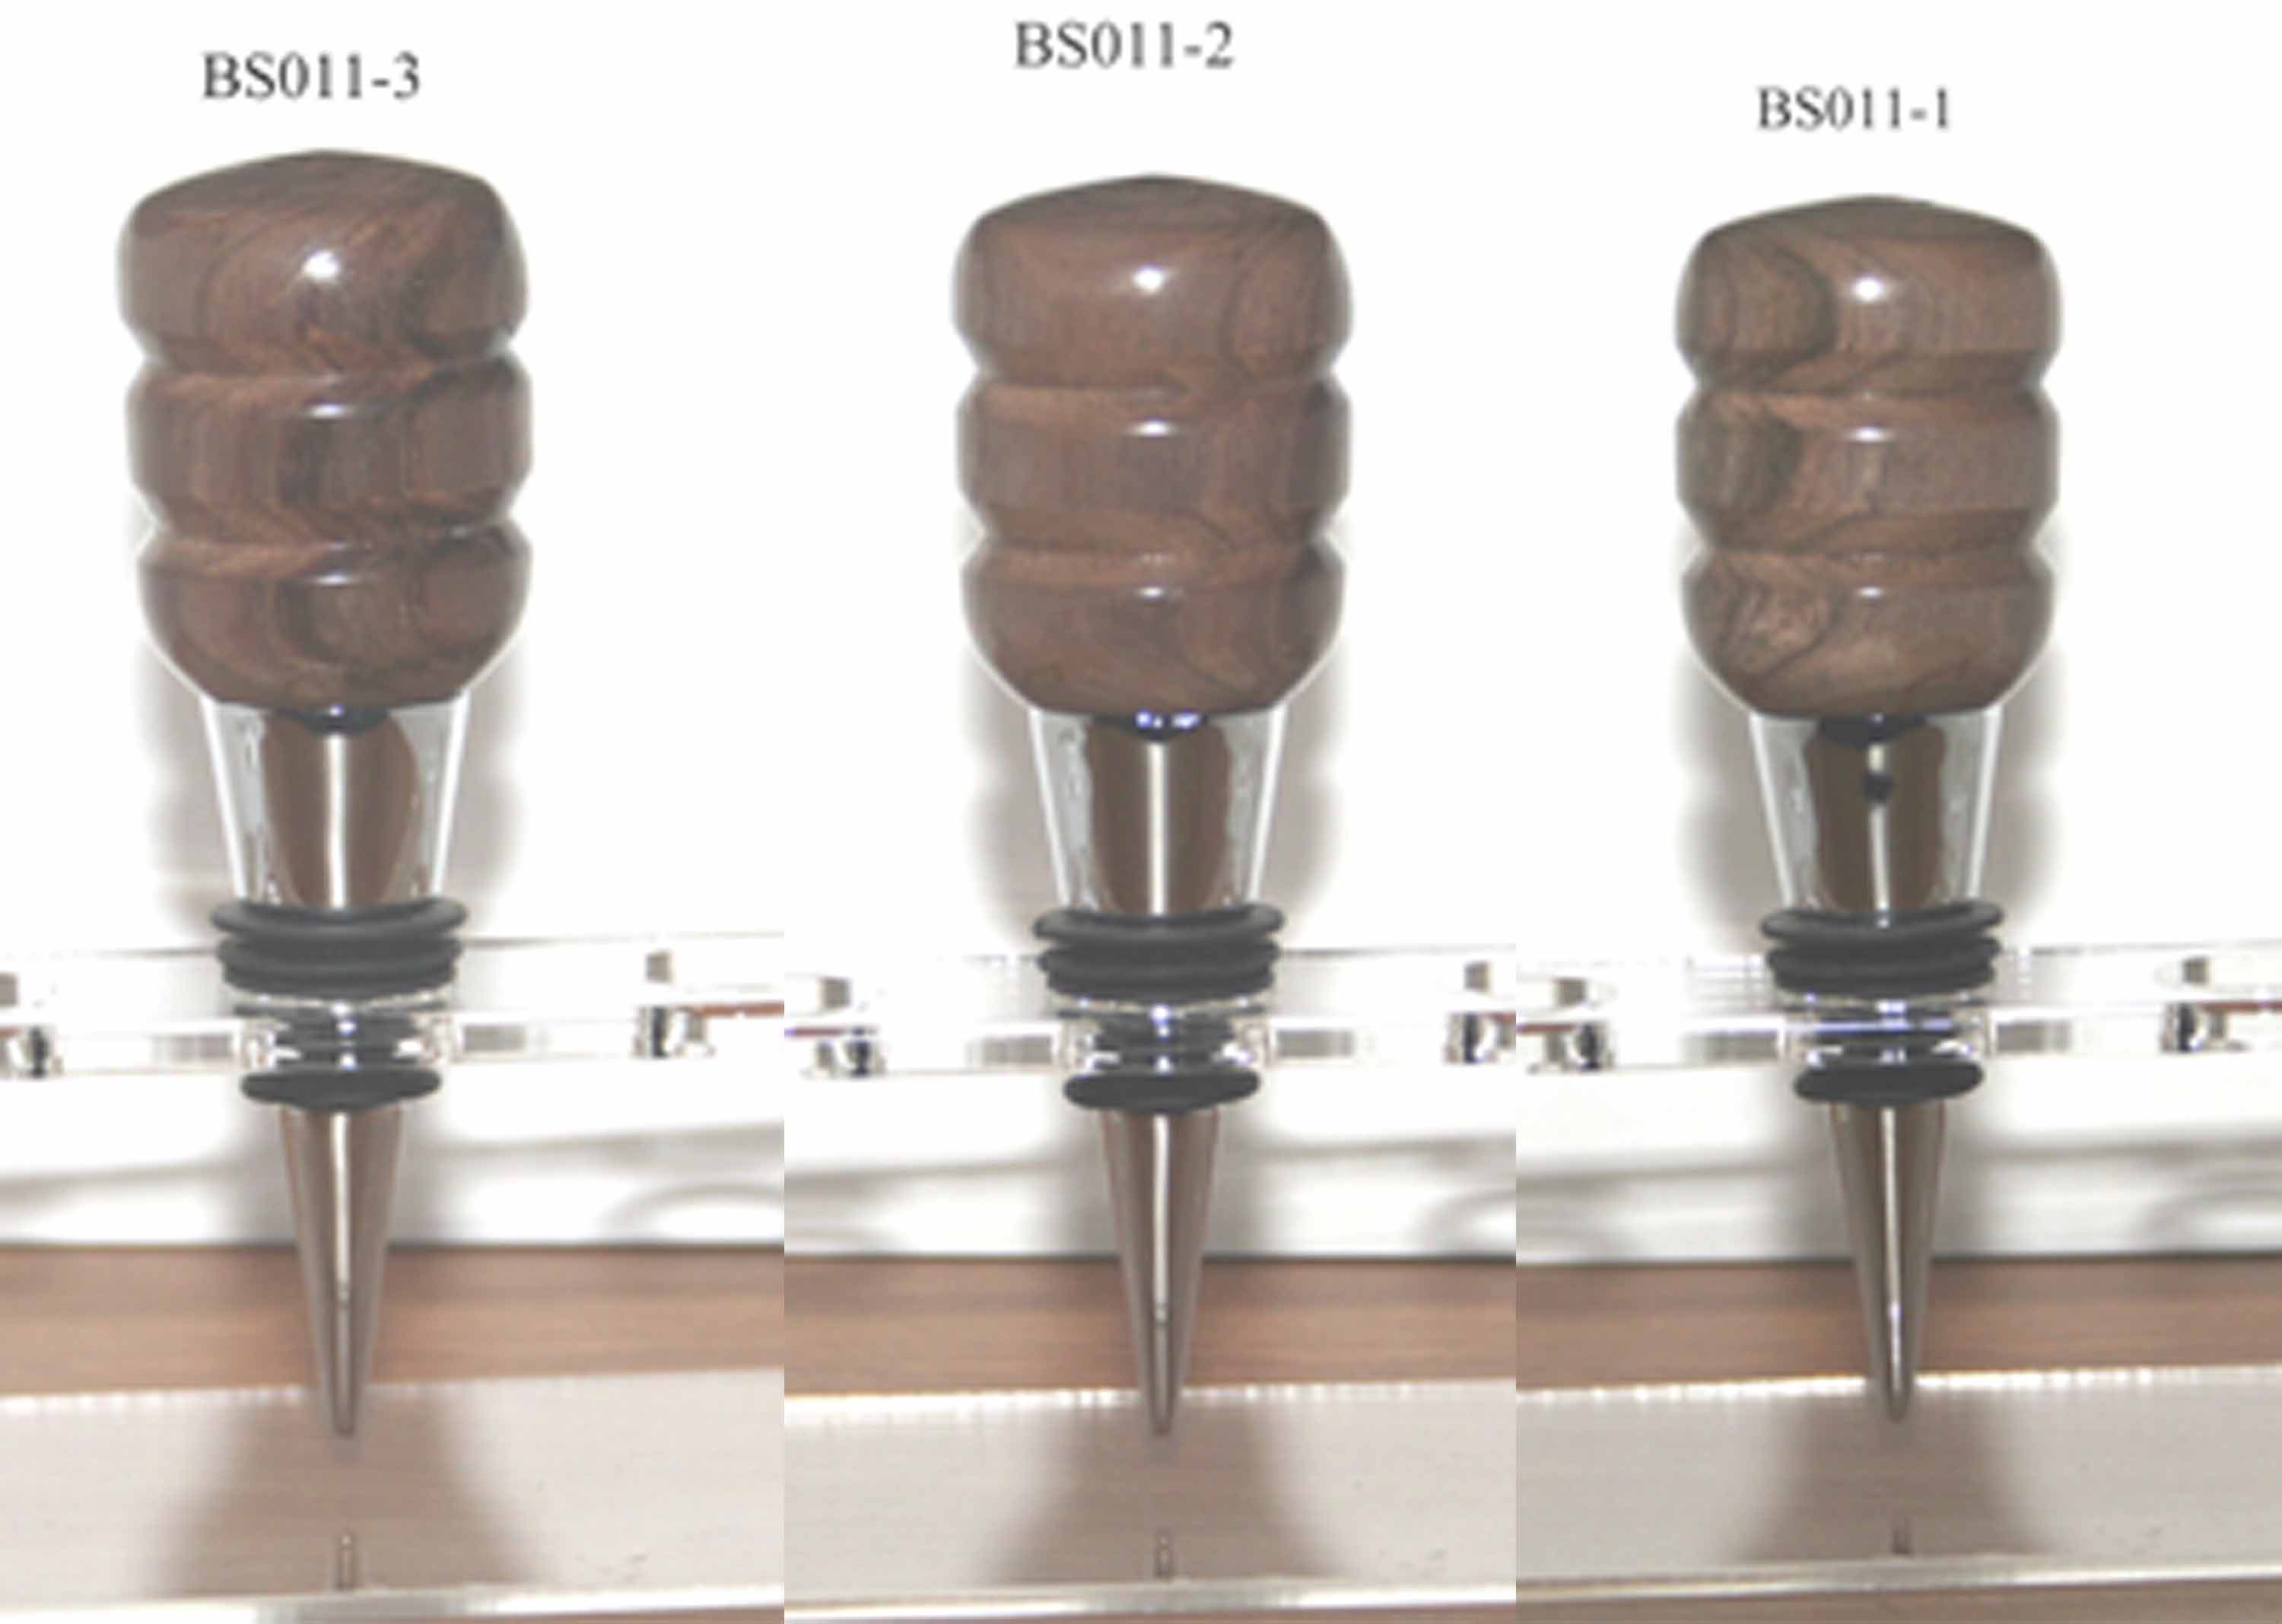 Bottle Stopper Walnut wood Chrome w/black silicone stopper 1-3/4" tall x 1-3/8" diameter, 4-1/2" long overall